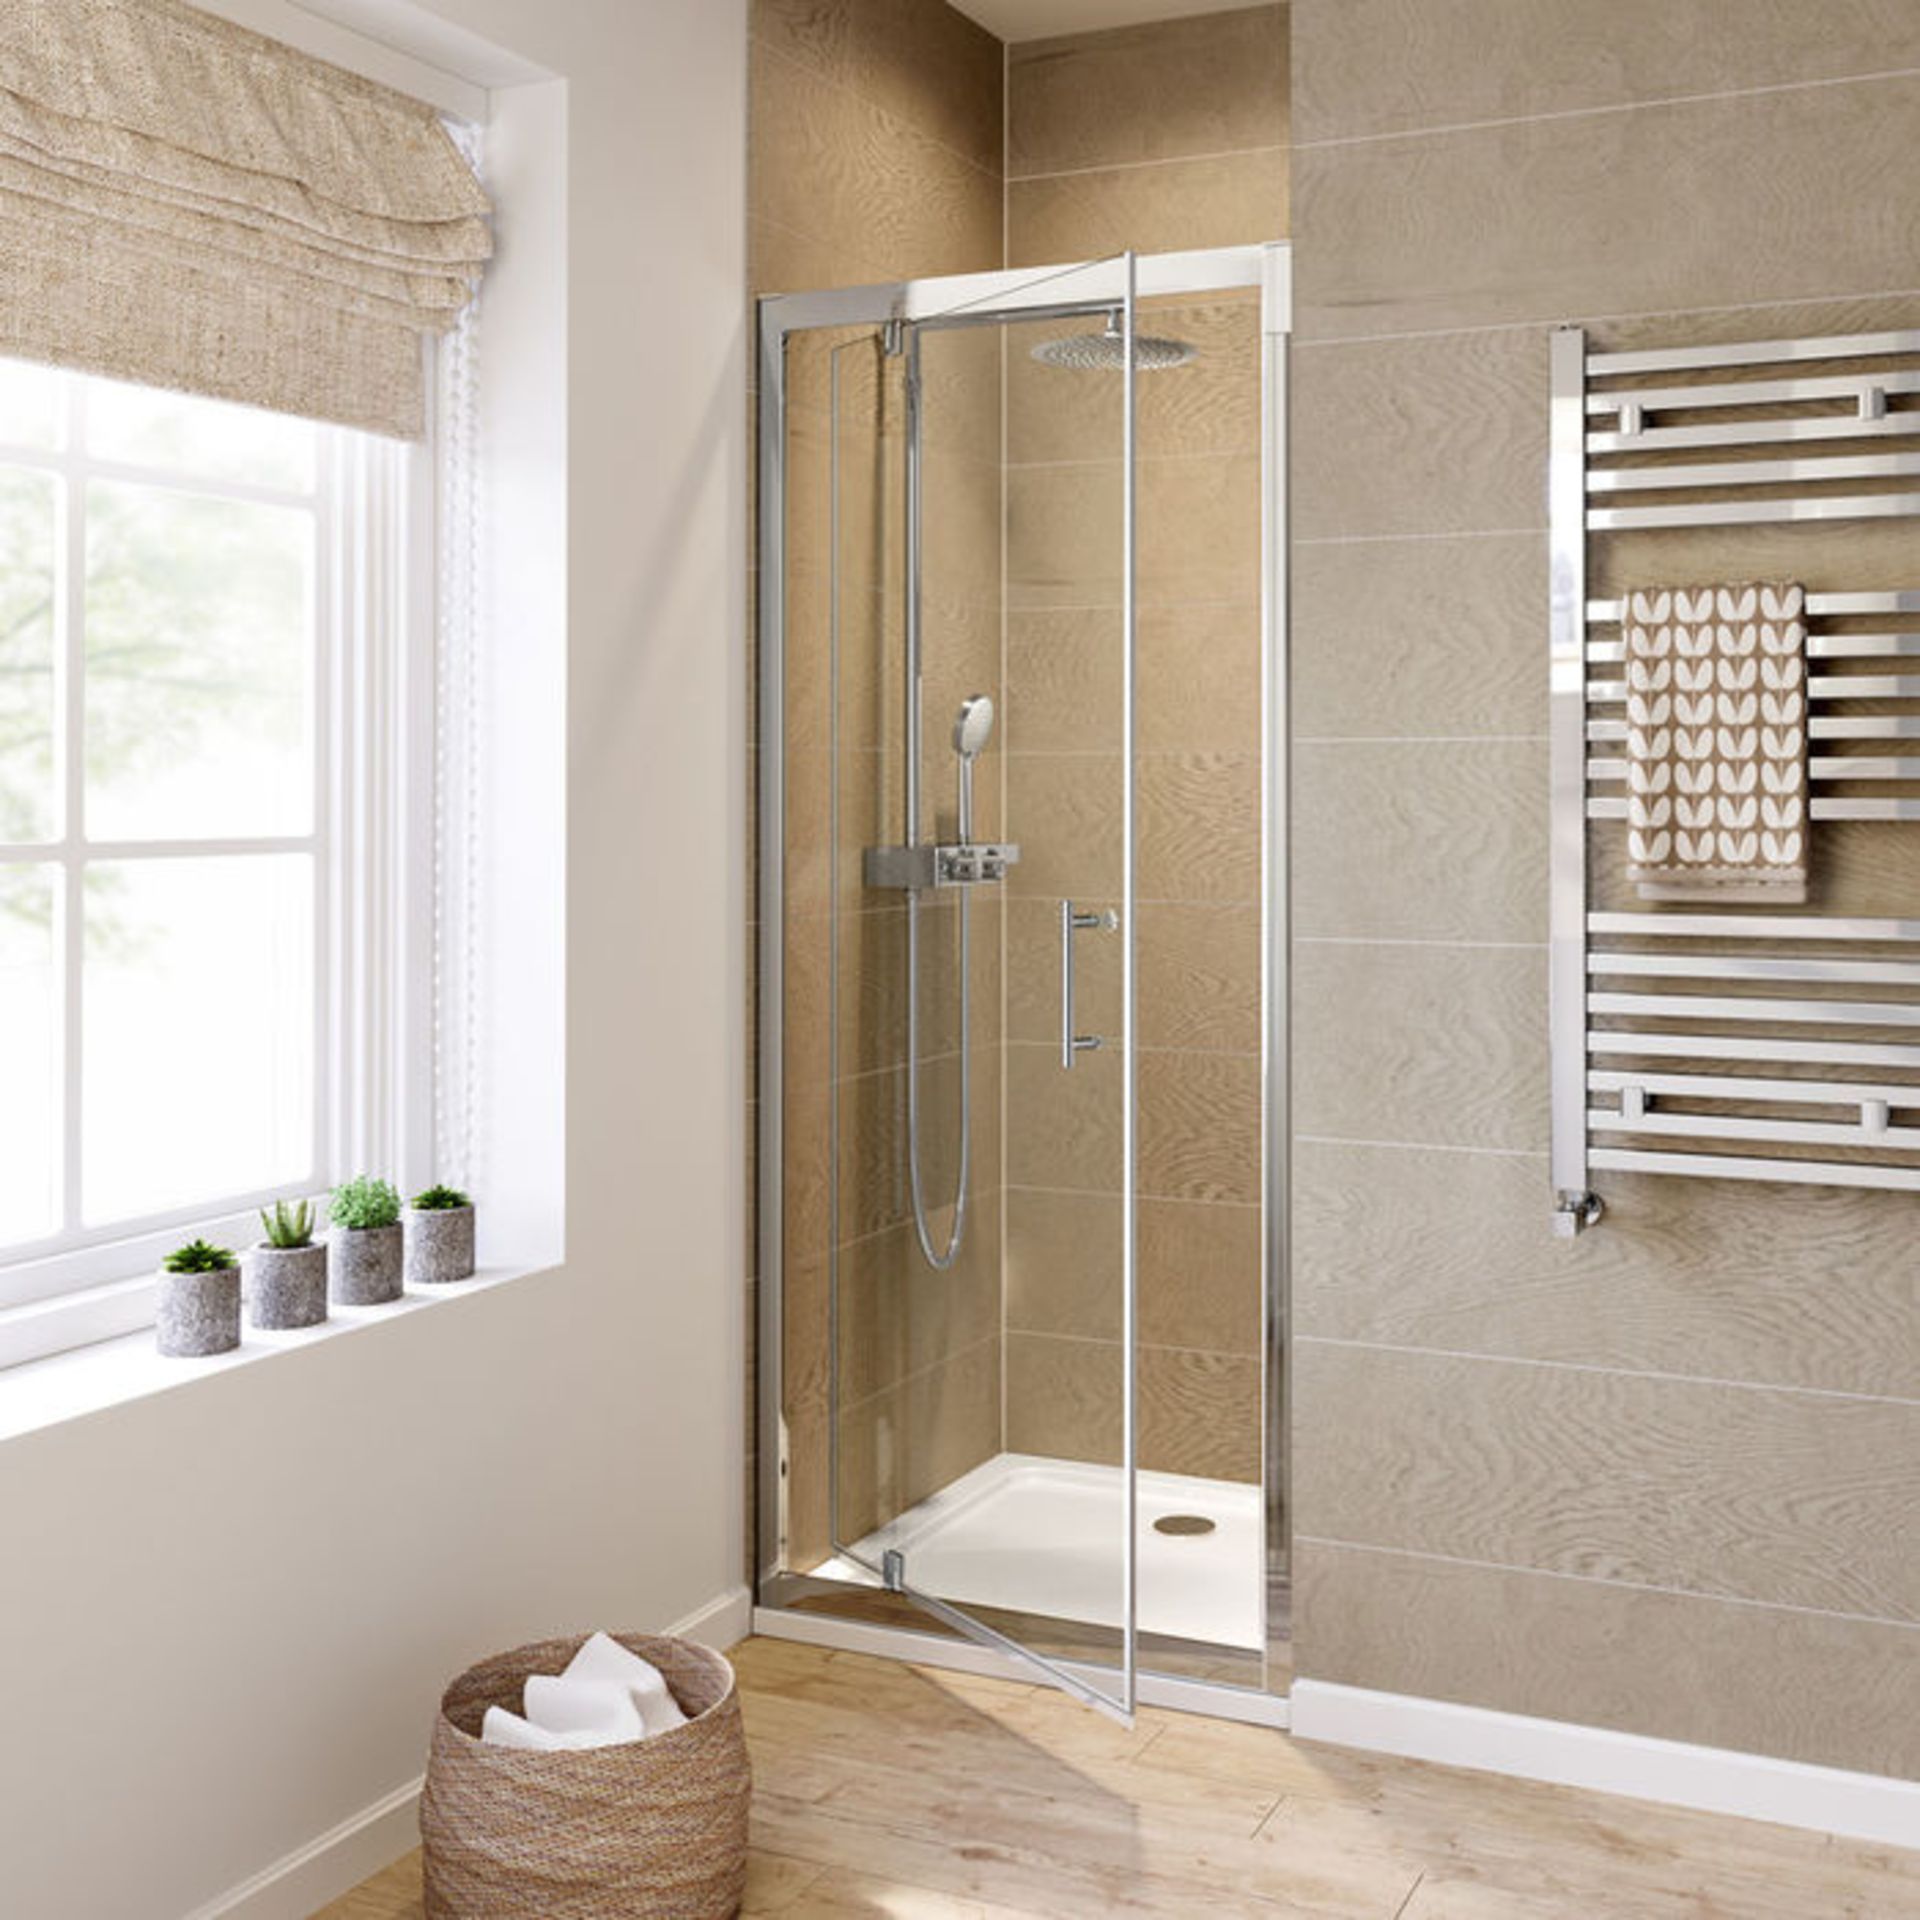 New 700 mm - 6 mm - Premium Pivot Shower Door RRP £299.99.8 mm Safety Glass Fully Waterproof Test - Image 2 of 2